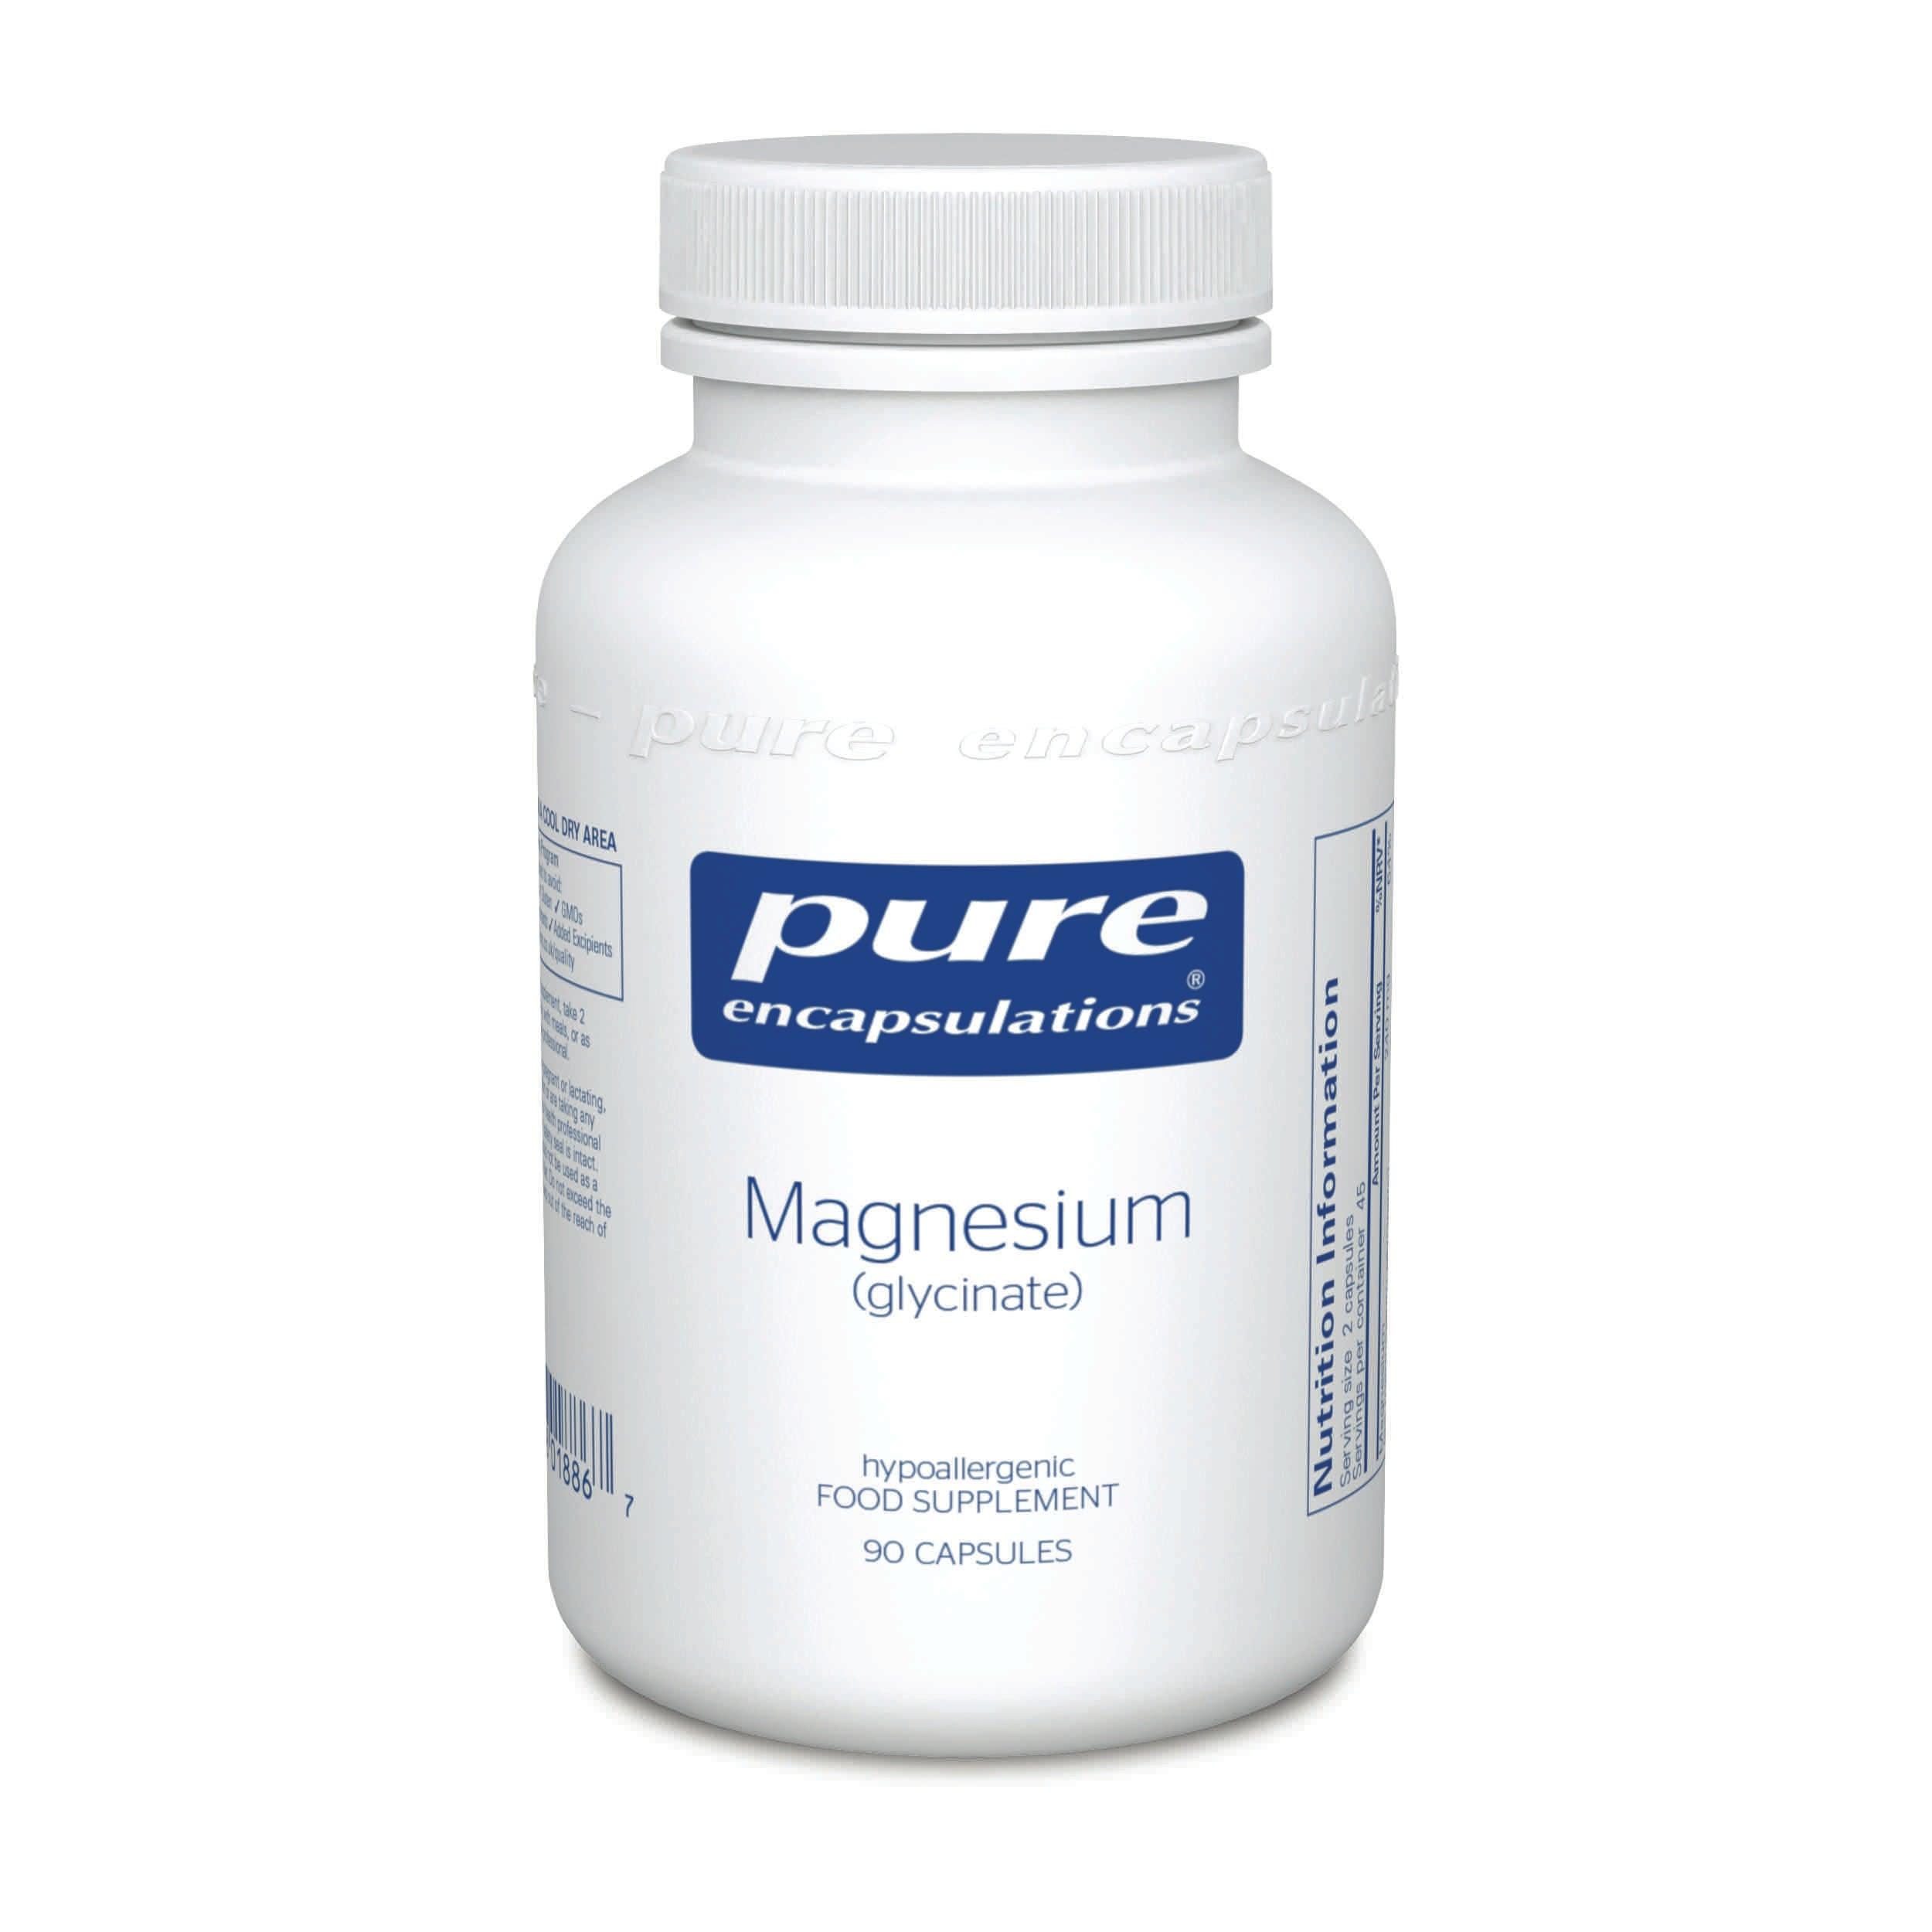 Pure Encapsulations Magnesium (glycinate) 90's - Approved Vitamins